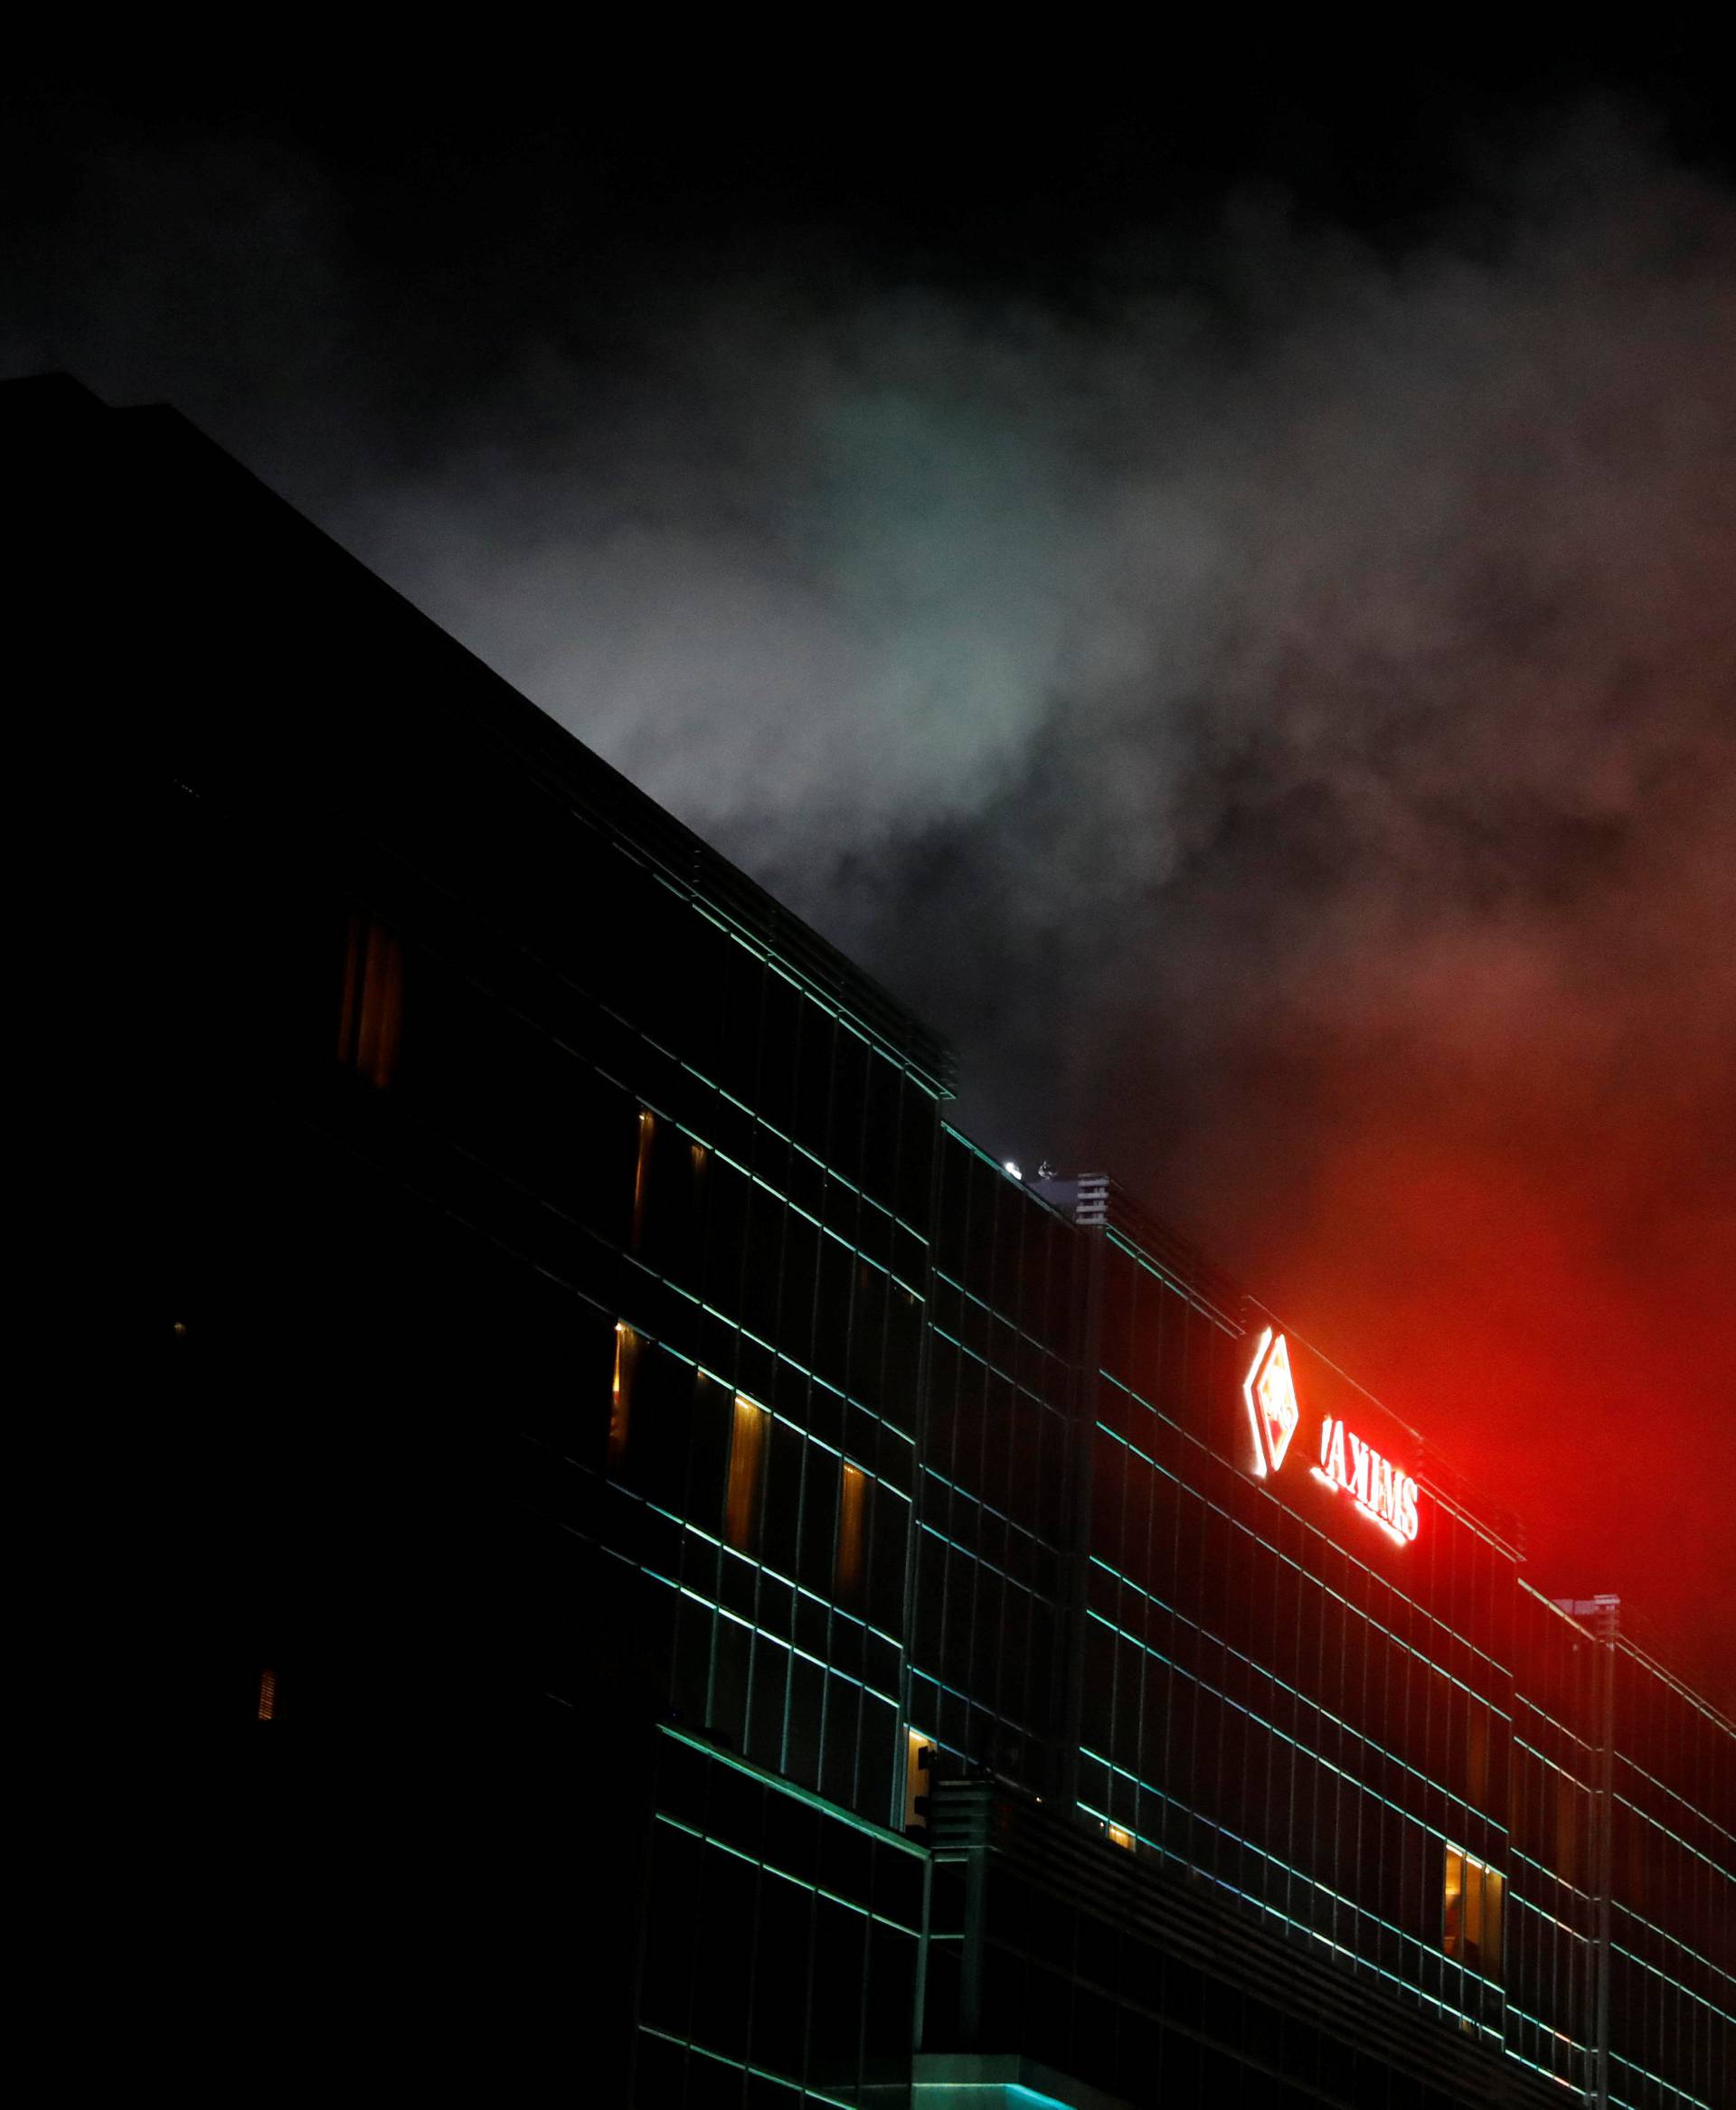 Smoke billows from the Resorts World building in Pasay City, Metro Manila, Philippines